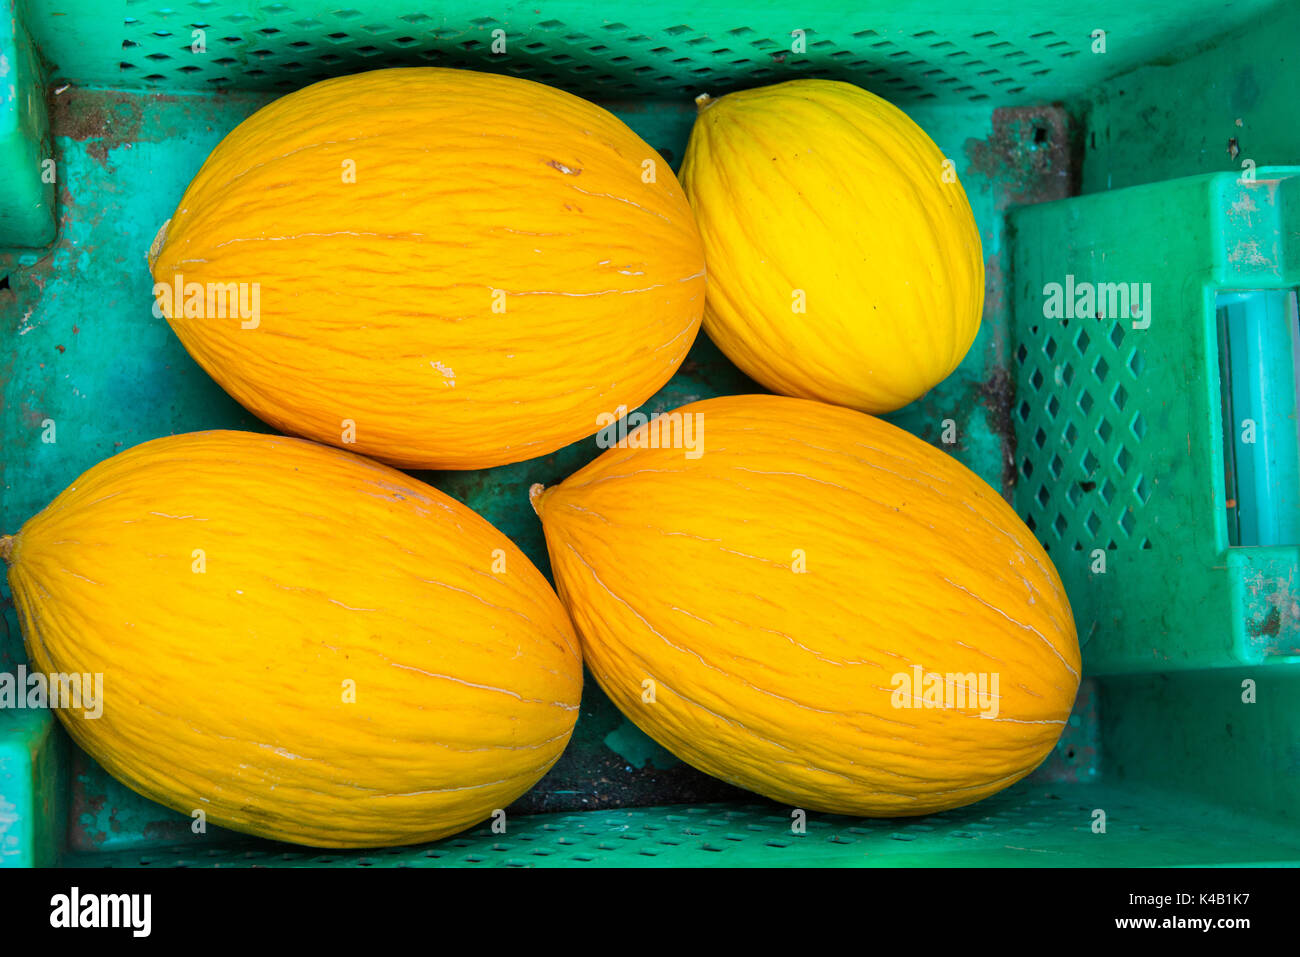 Yellow melons in a green plastic basket Stock Photo